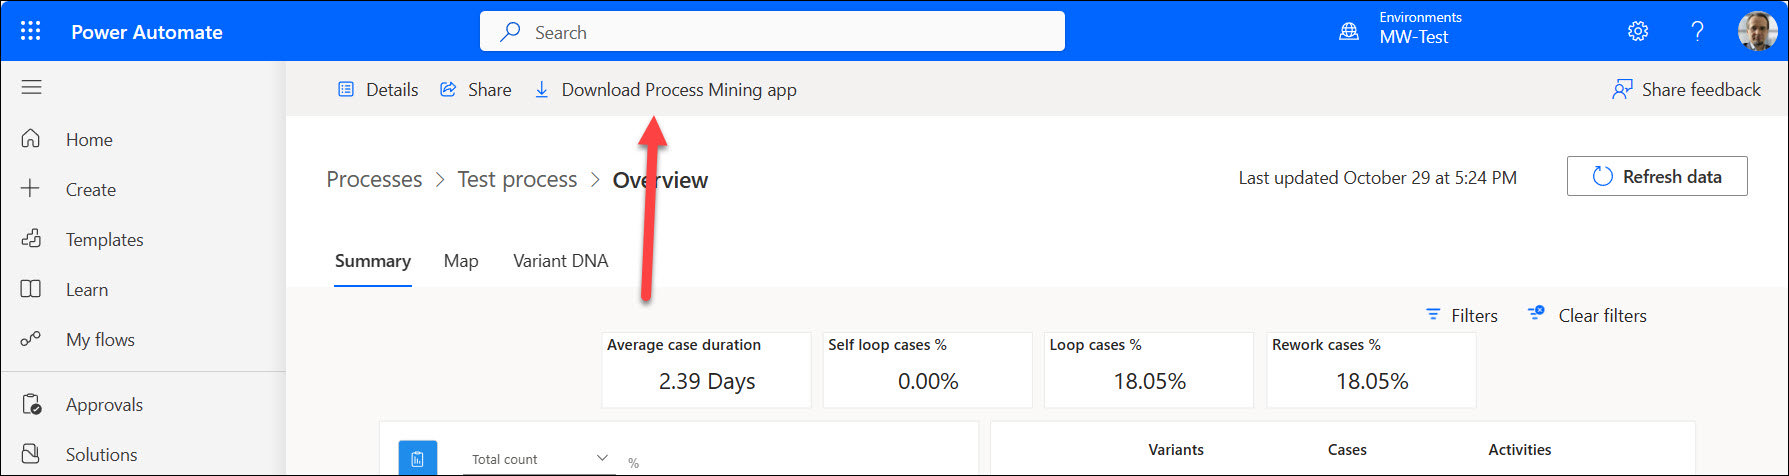 This screenshot shows how to download the Process Mining desktop application.